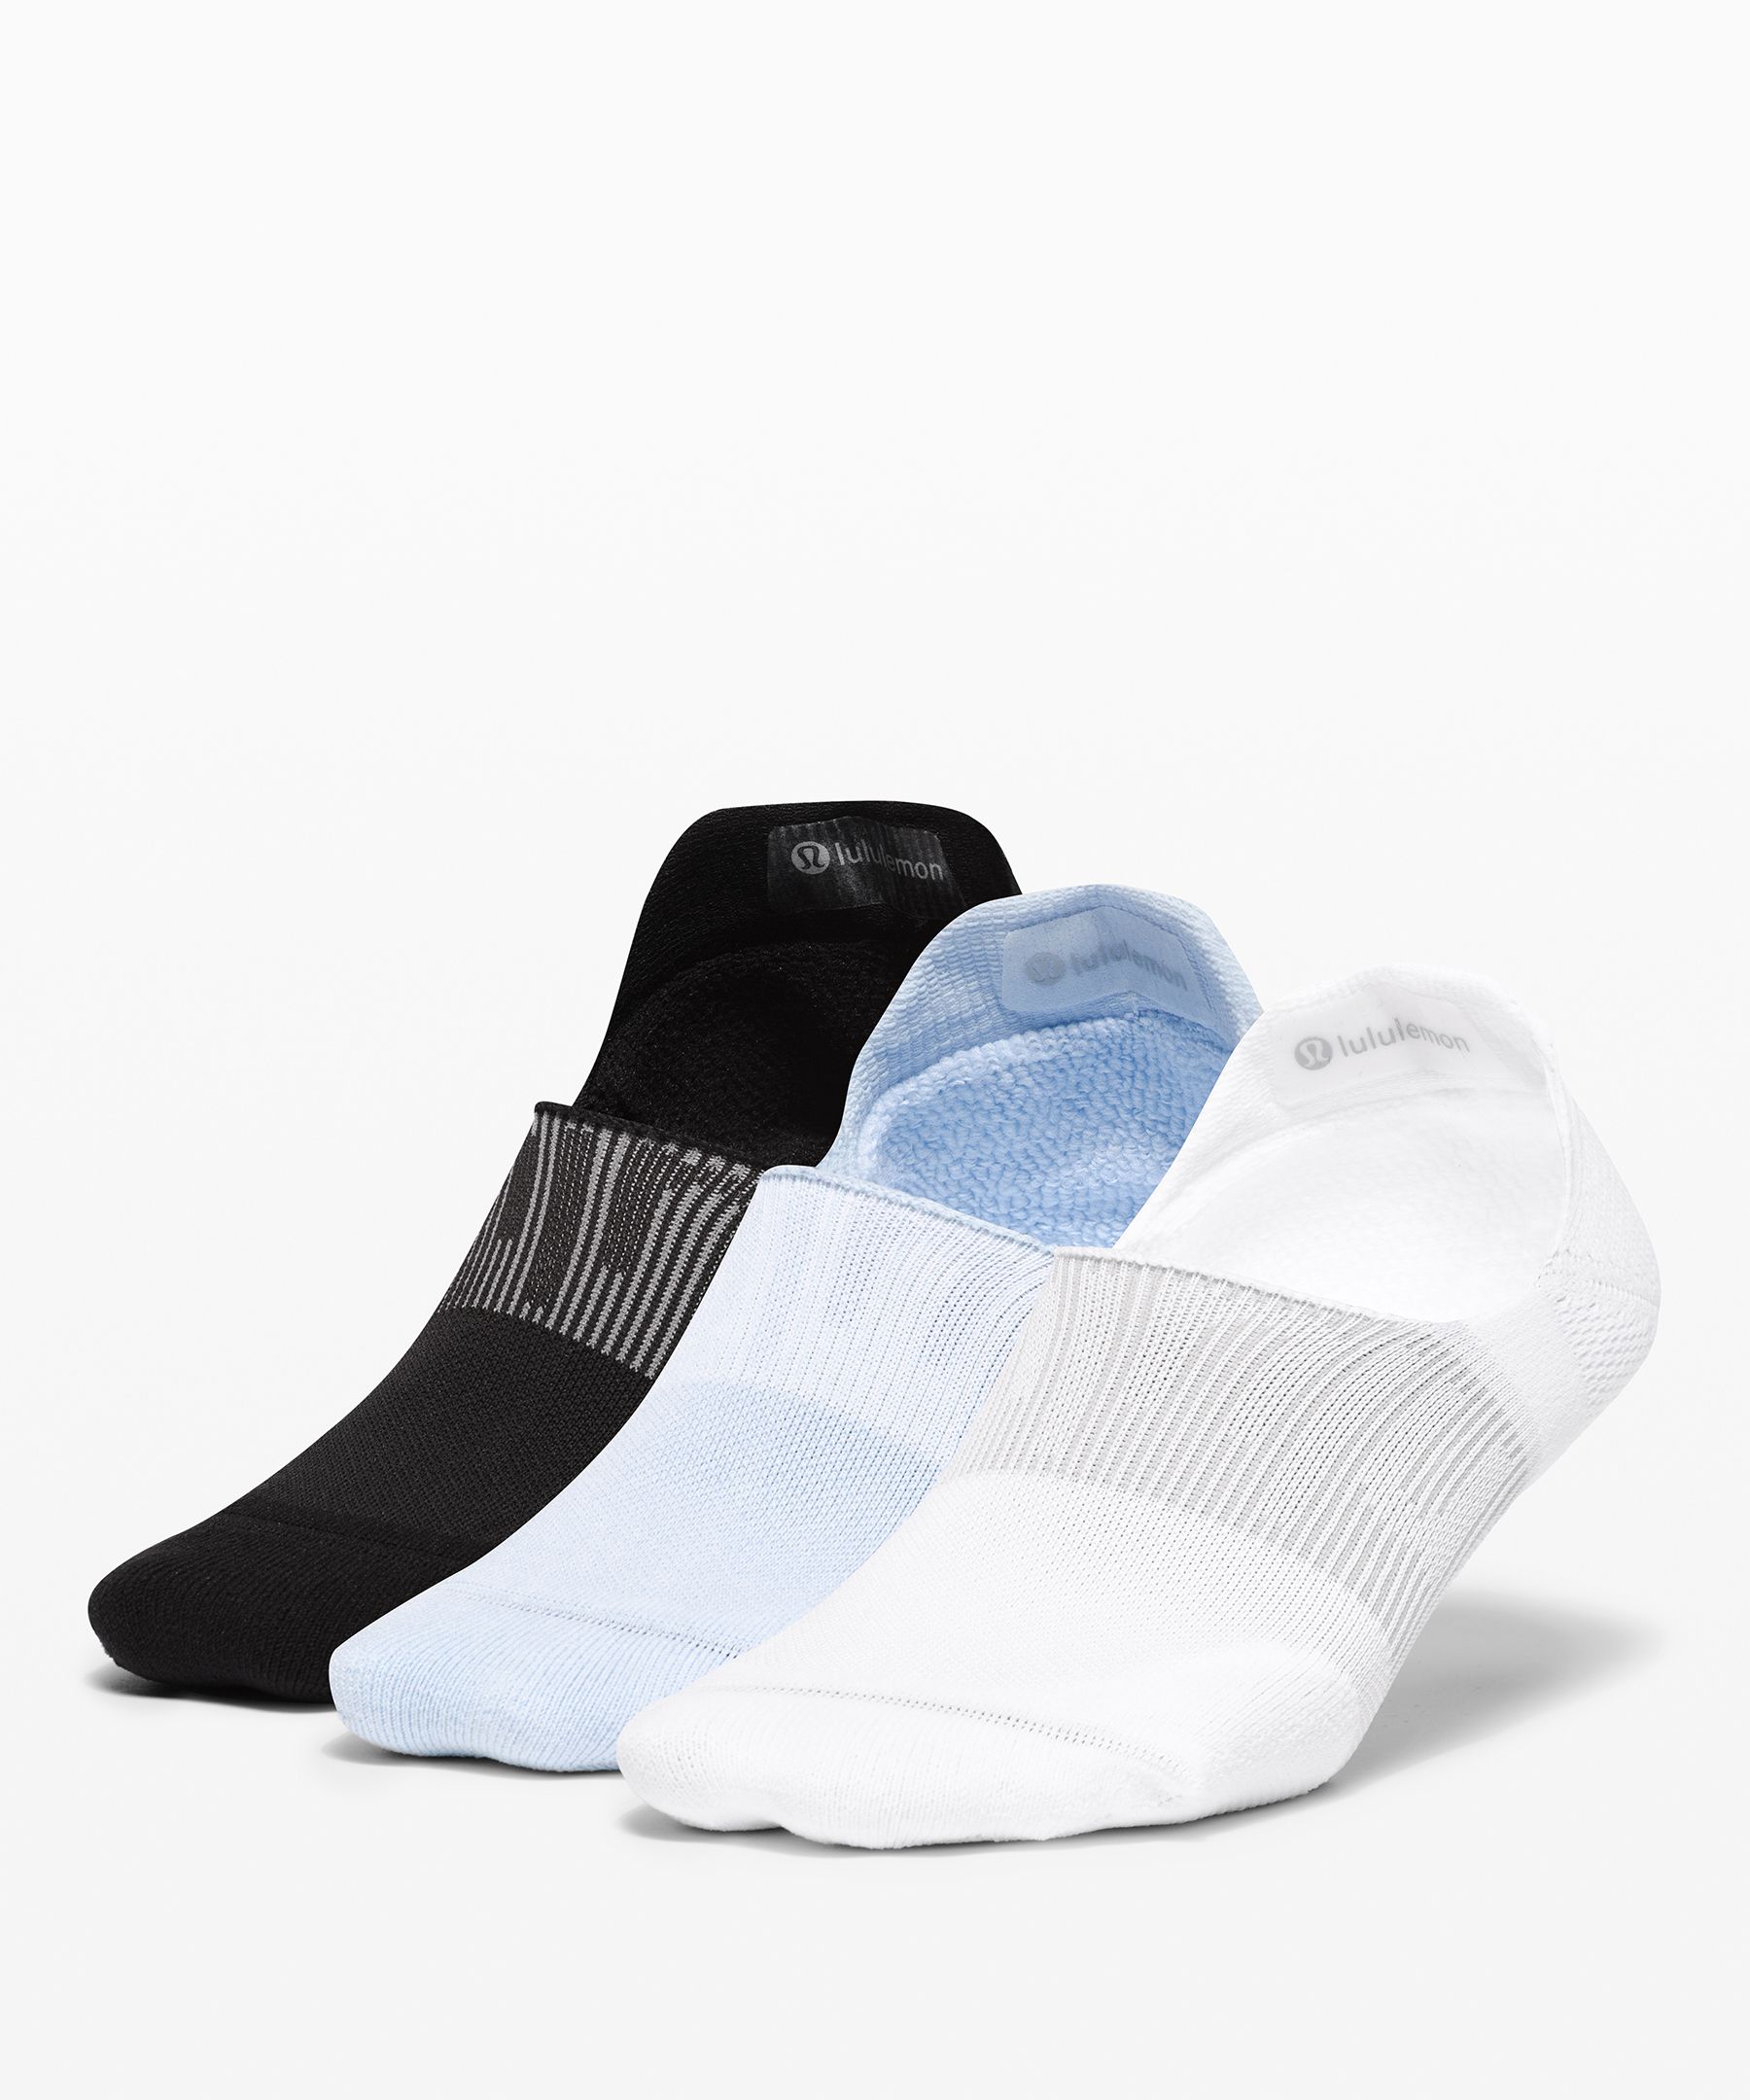 Lululemon Power Stride No-show Socks With Active Grip 3 Pack In White/blue Linen/black